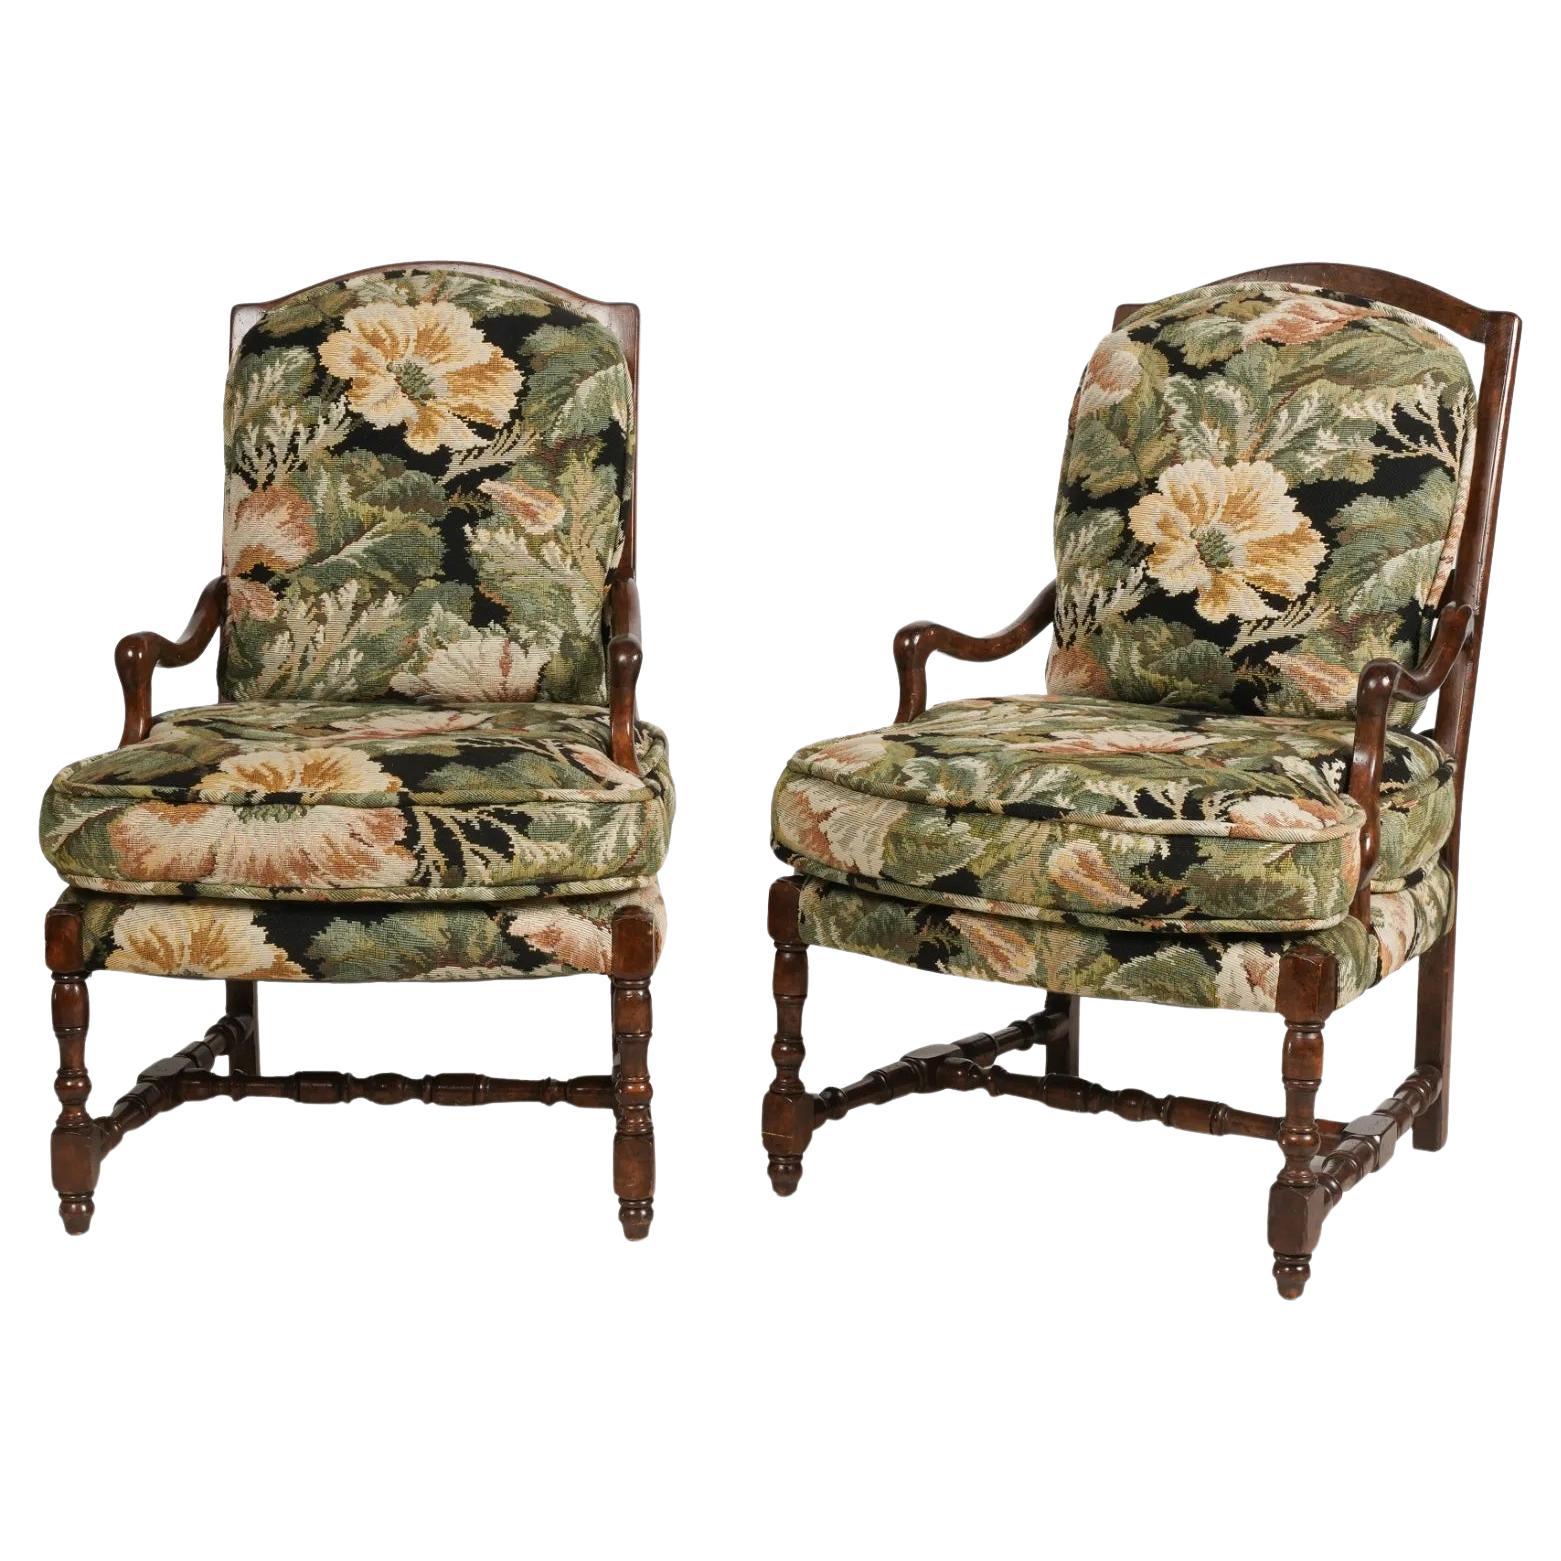 Pair of French Provincial Fruitwood Upholstered Arm Chairs Late 20th Century For Sale